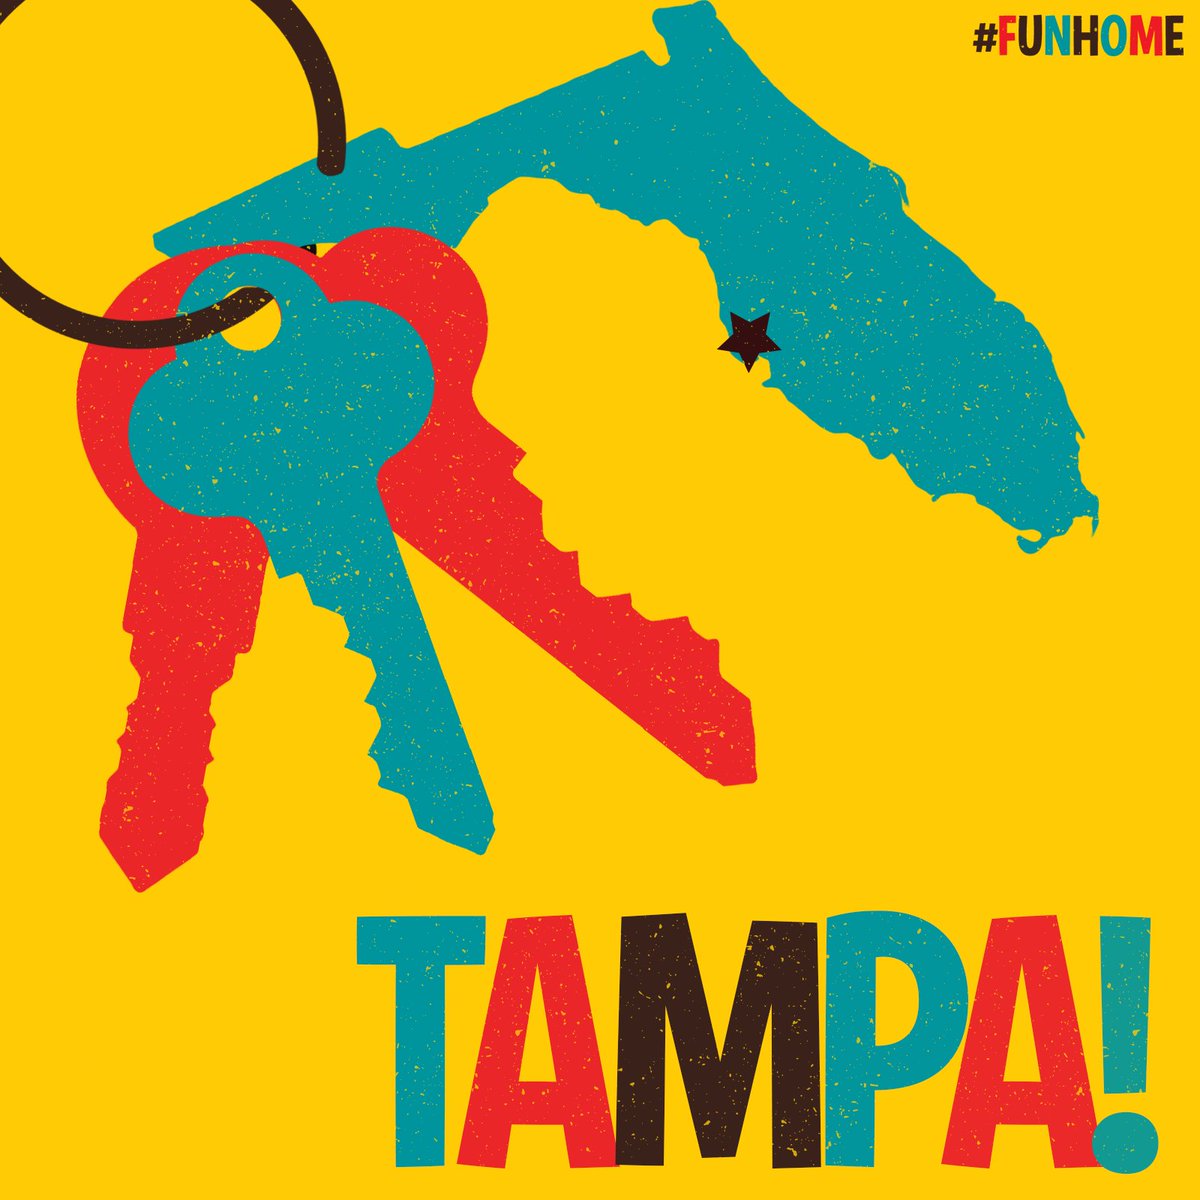 Here we come, TAMPA. TWO WEEKS until we open at the @StrazCenter! Tickets: funho.me/2cfUKUR #FunHome